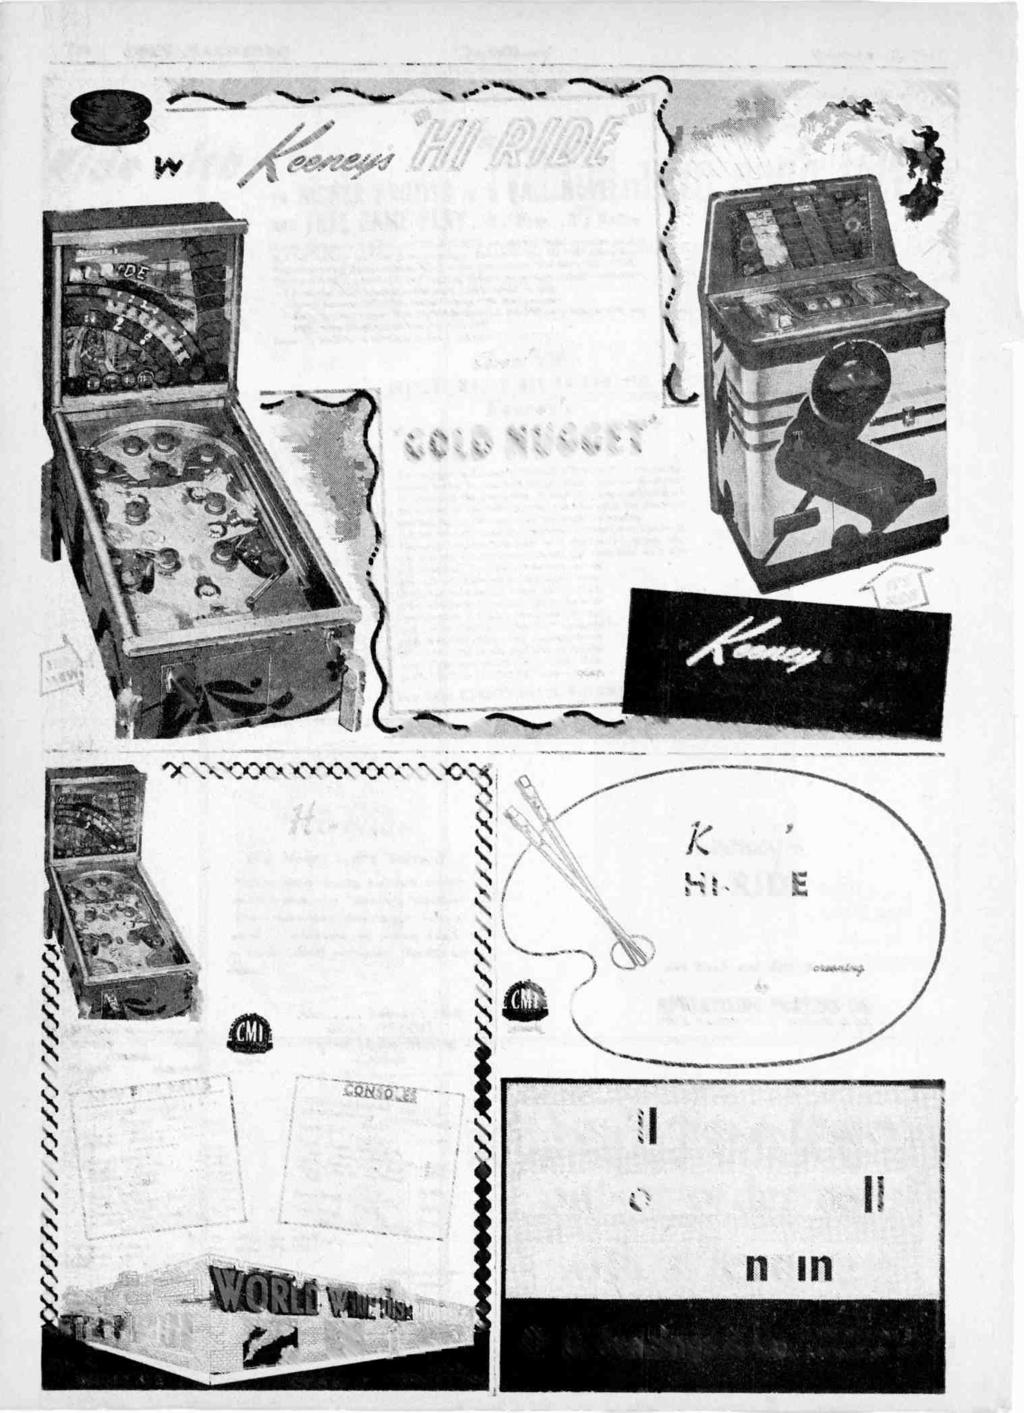 _....,.. 130 COIN MACHINES The Billboard re,1,..,.,, ///, - / November 15, 1947,./irii/iii r, Pidevr th, a_= fdfcl l 12, F - 900I00 Sps000: TO RICHER PROFITS IN 5 BALL NOVELTY AND FREE GAME PLAY.